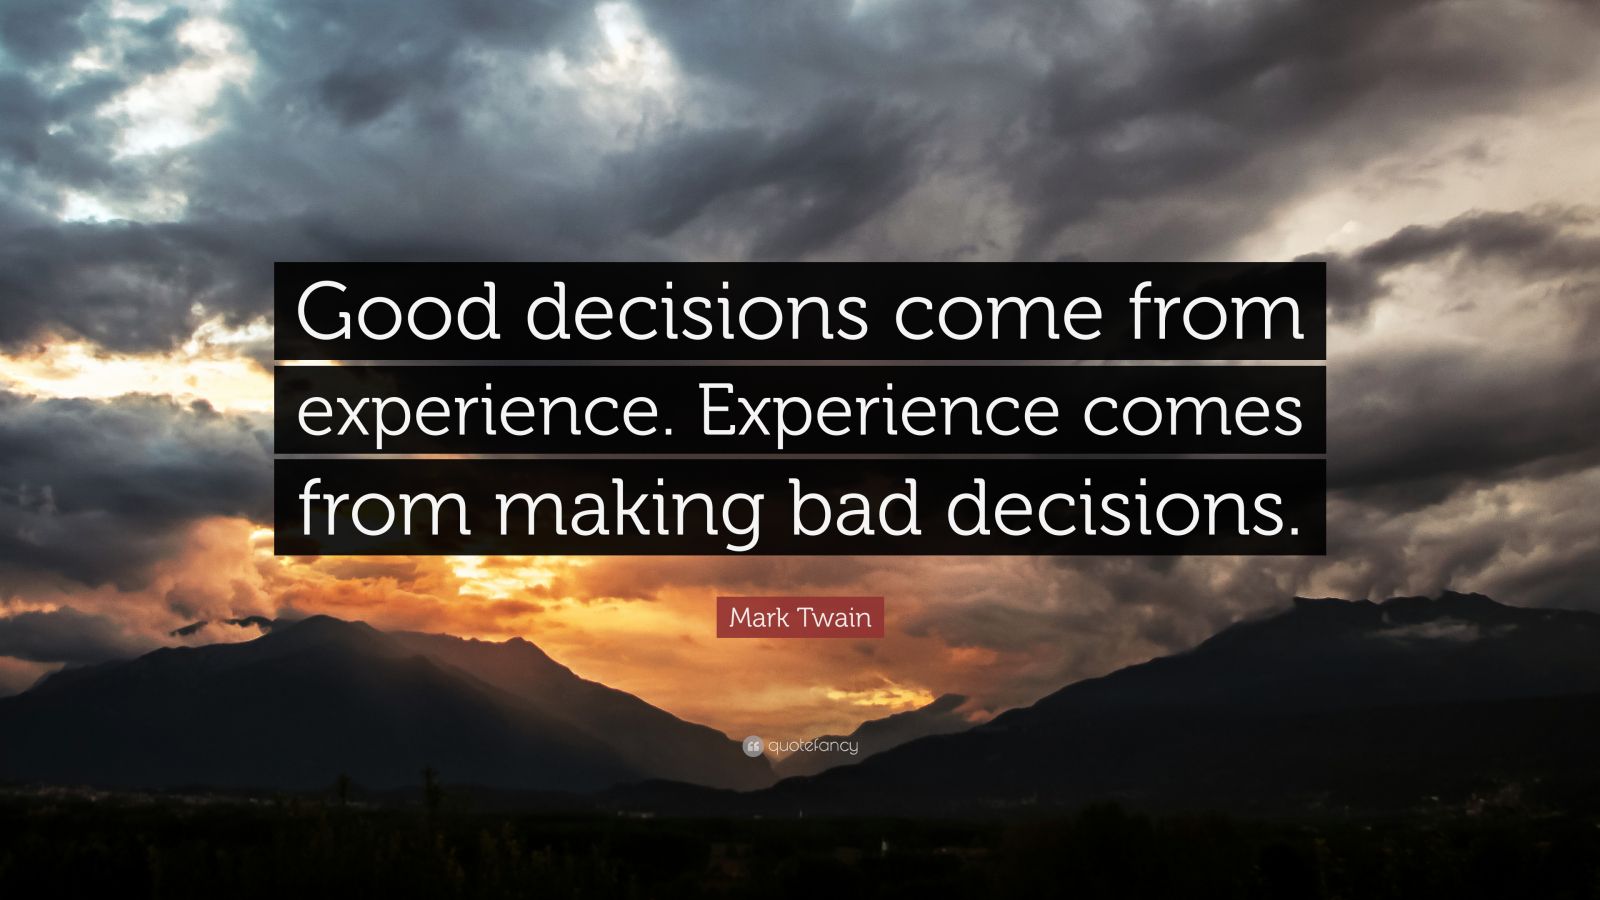 Mark Twain Quote: “Good decisions come from experience. Experience